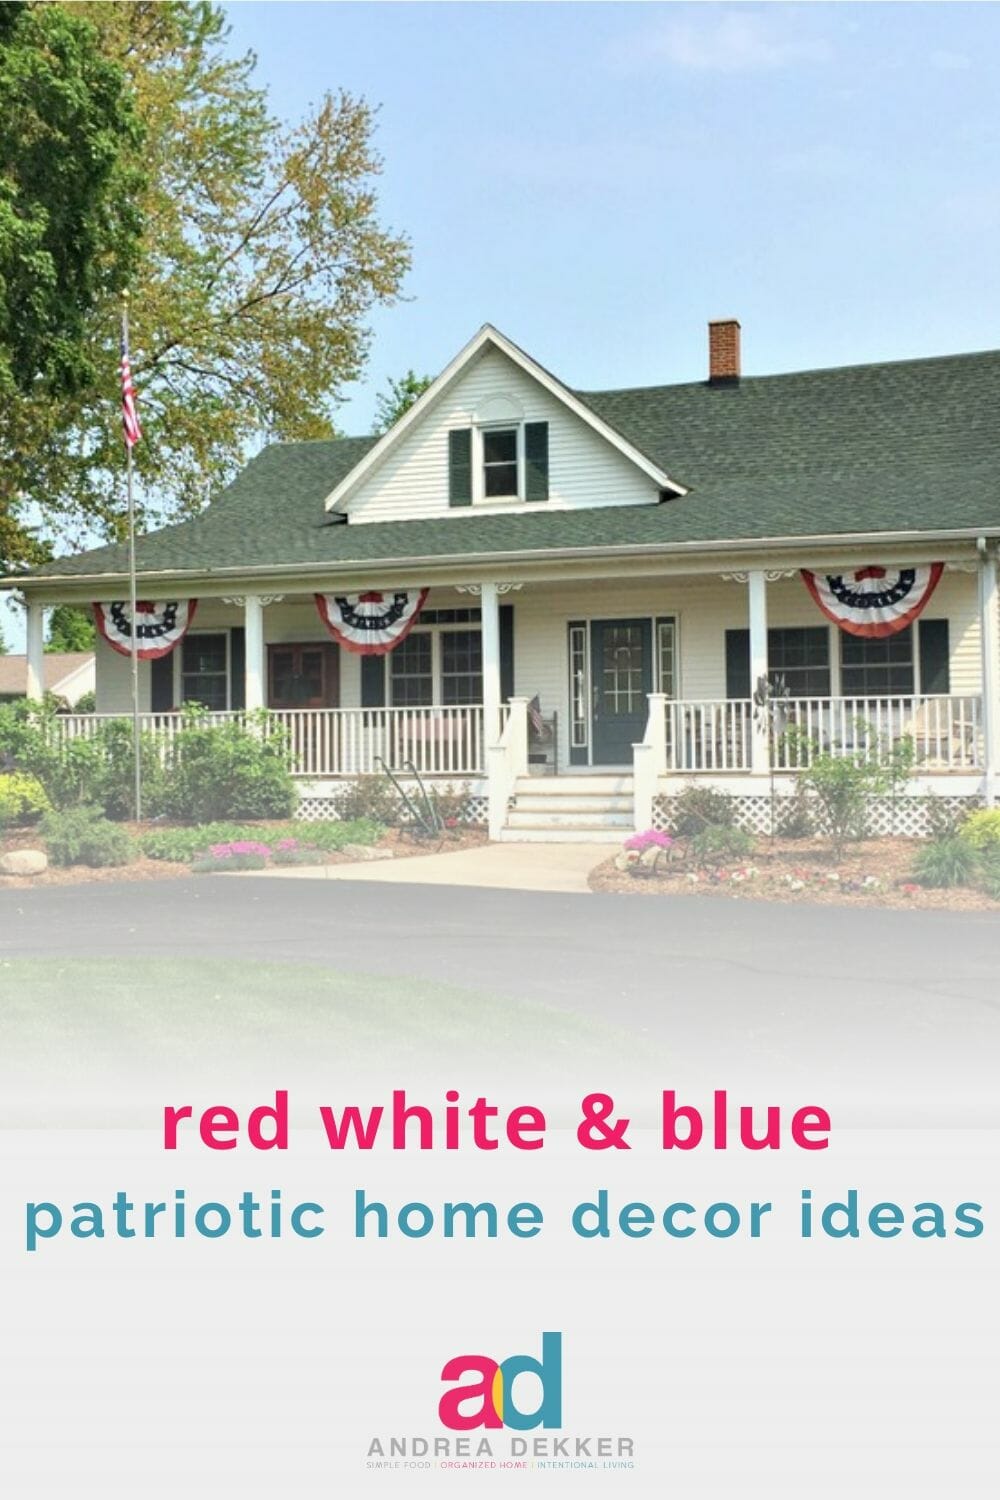 Take a tour through our family's historic farmhouse, decked out with loads of primitive charm and red, white, and blue patriotic home decor! via @andreadekker